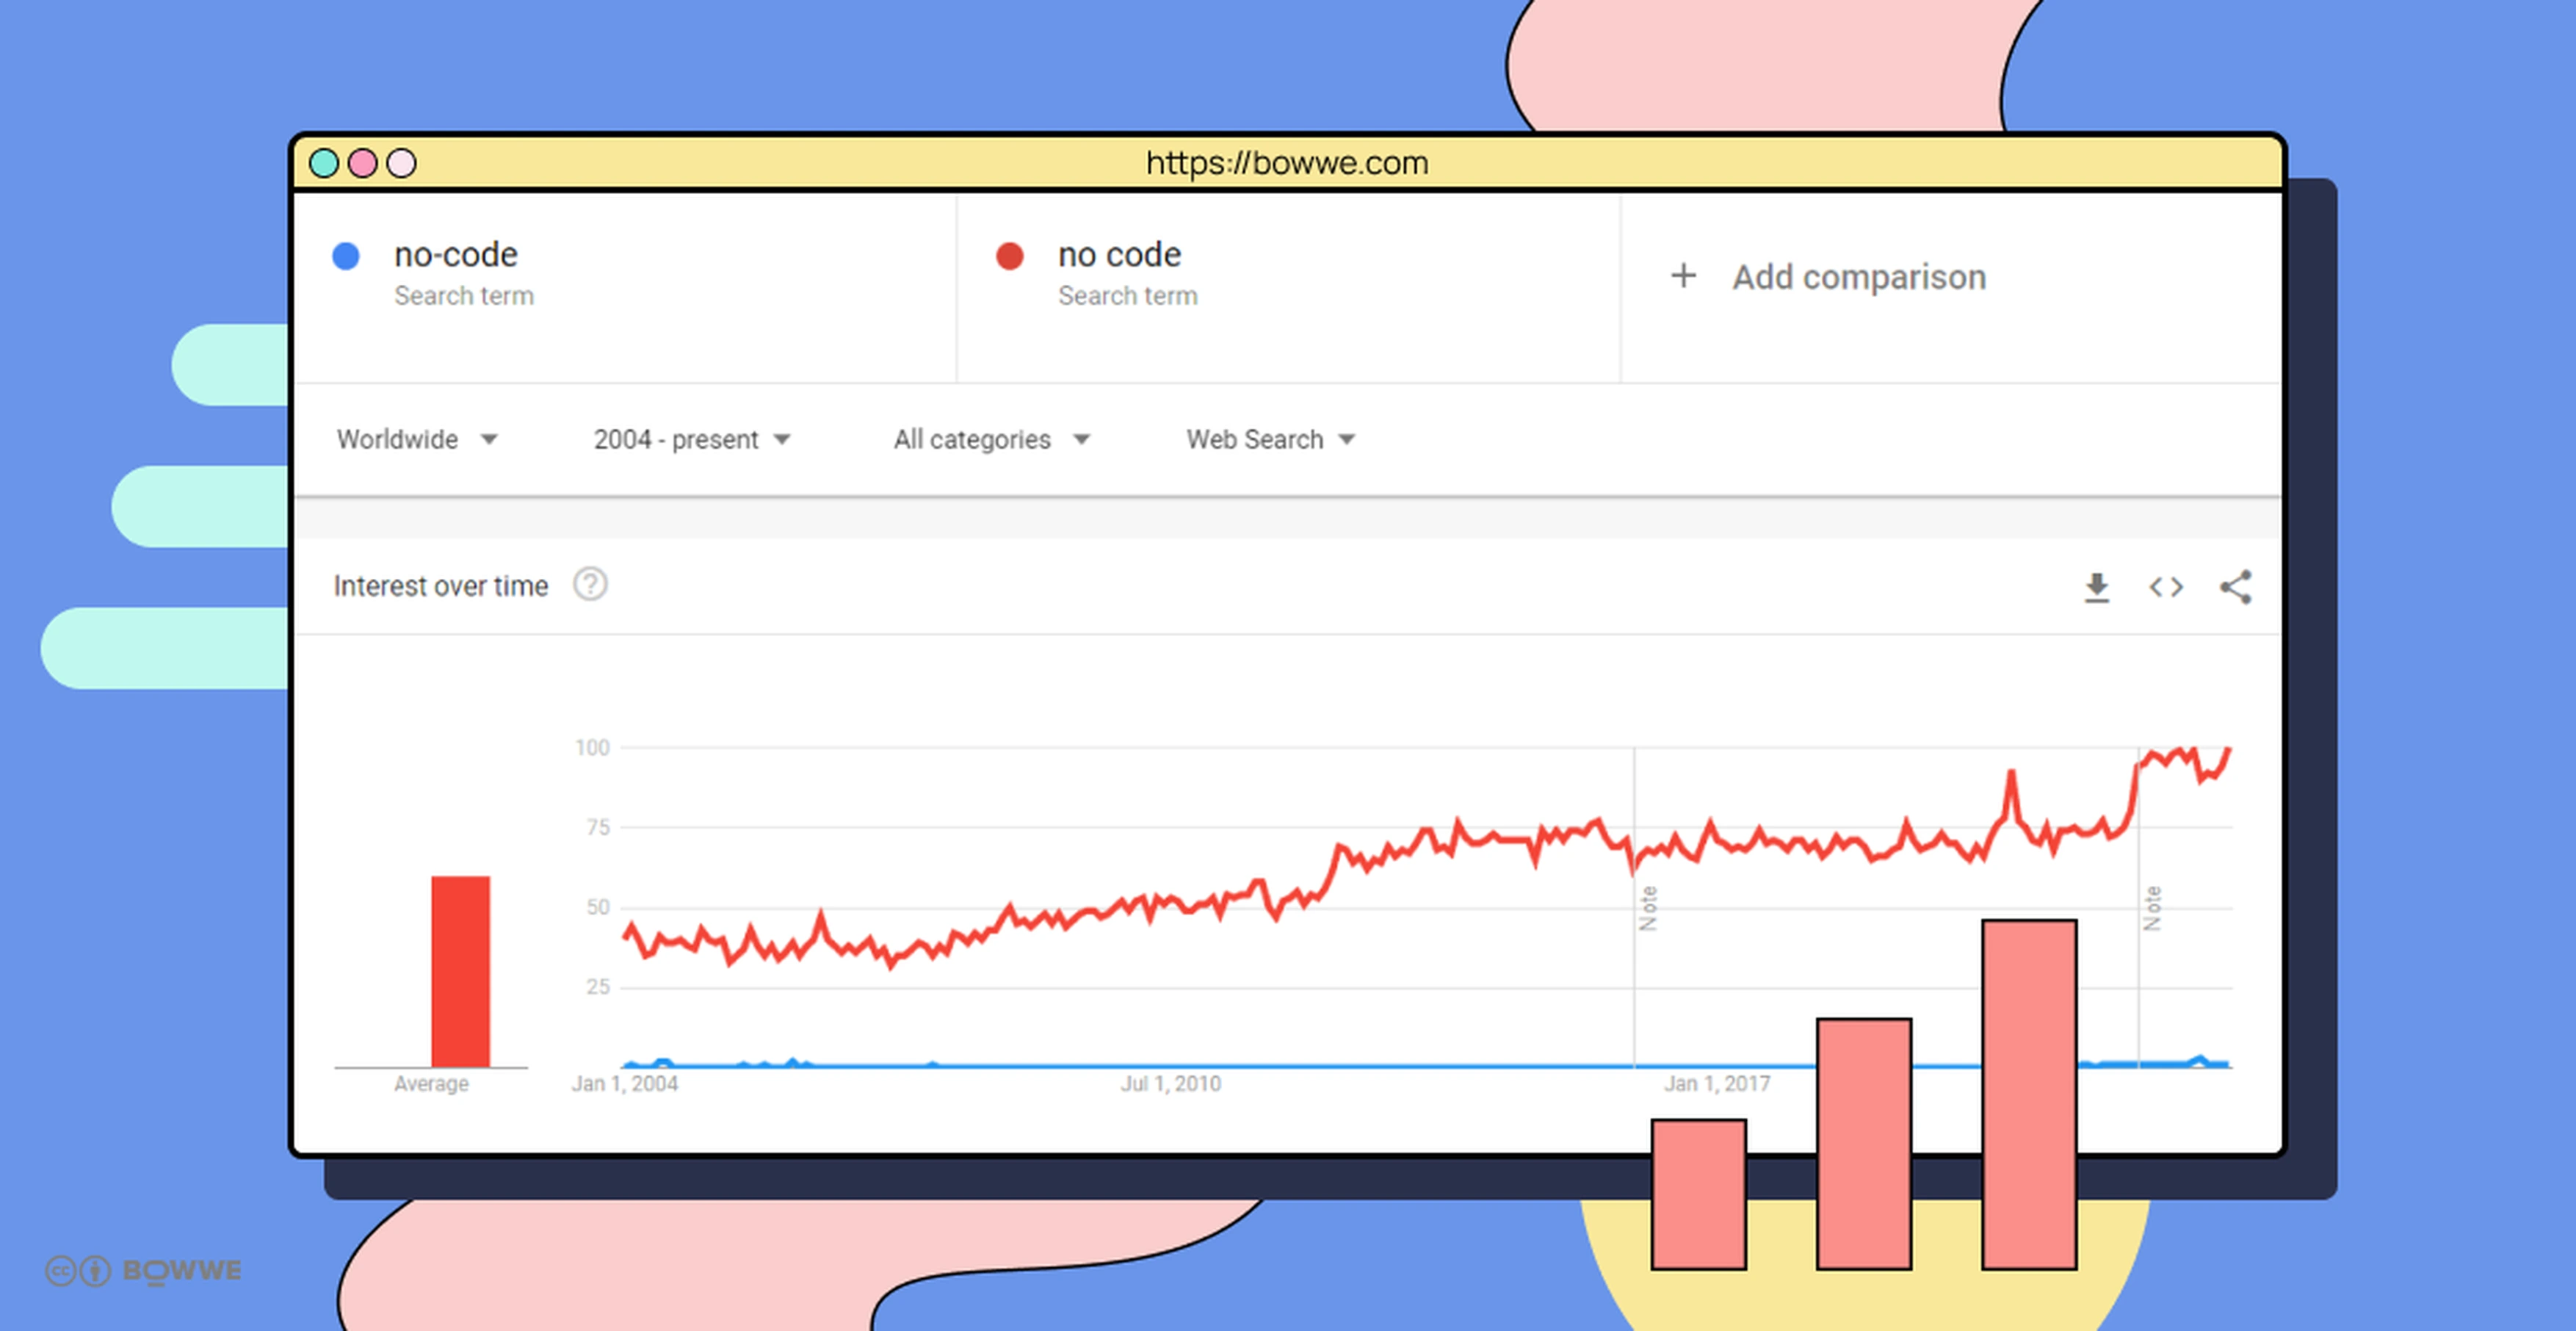 Screenshot of stats from Google Trends for keywords "no code"